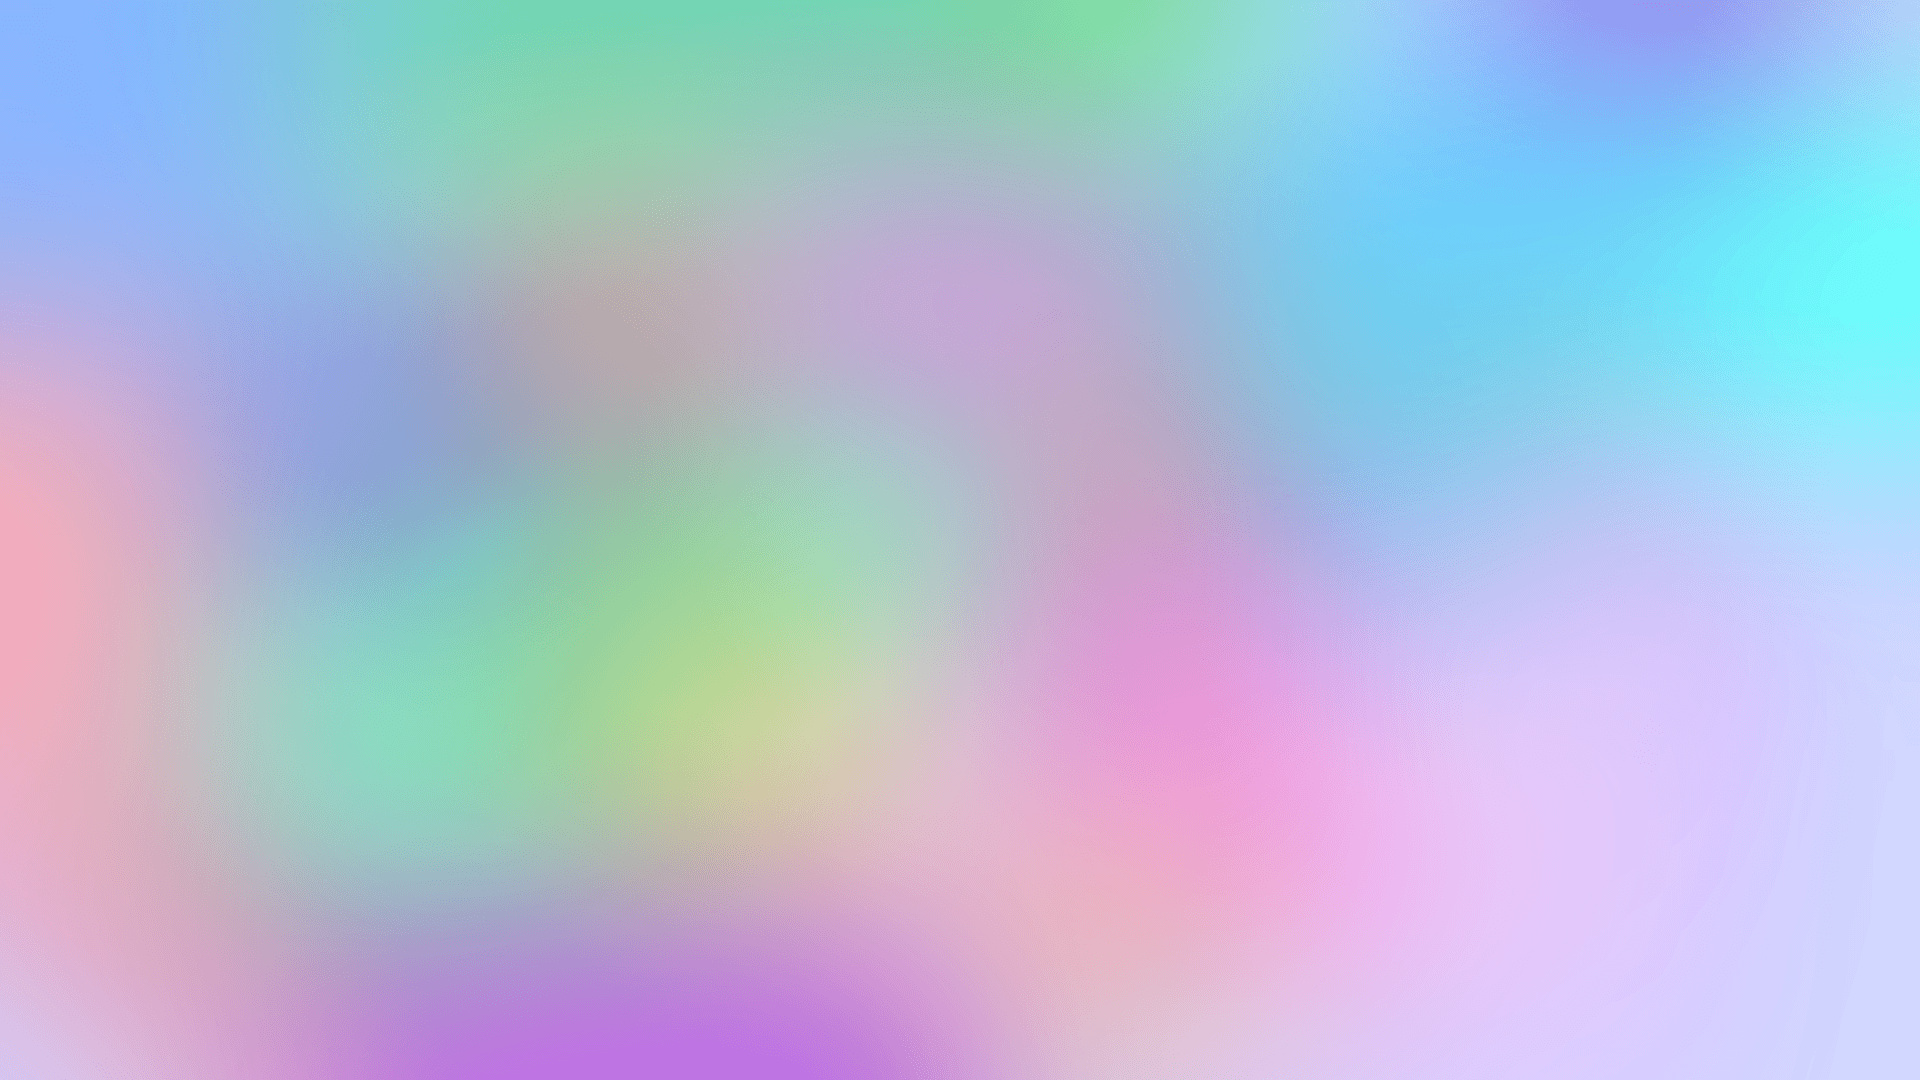 Pastel colors wallpapers, Desktop and mobile, Rainbow palette, Floral and blue themes, 1920x1080 Full HD Desktop